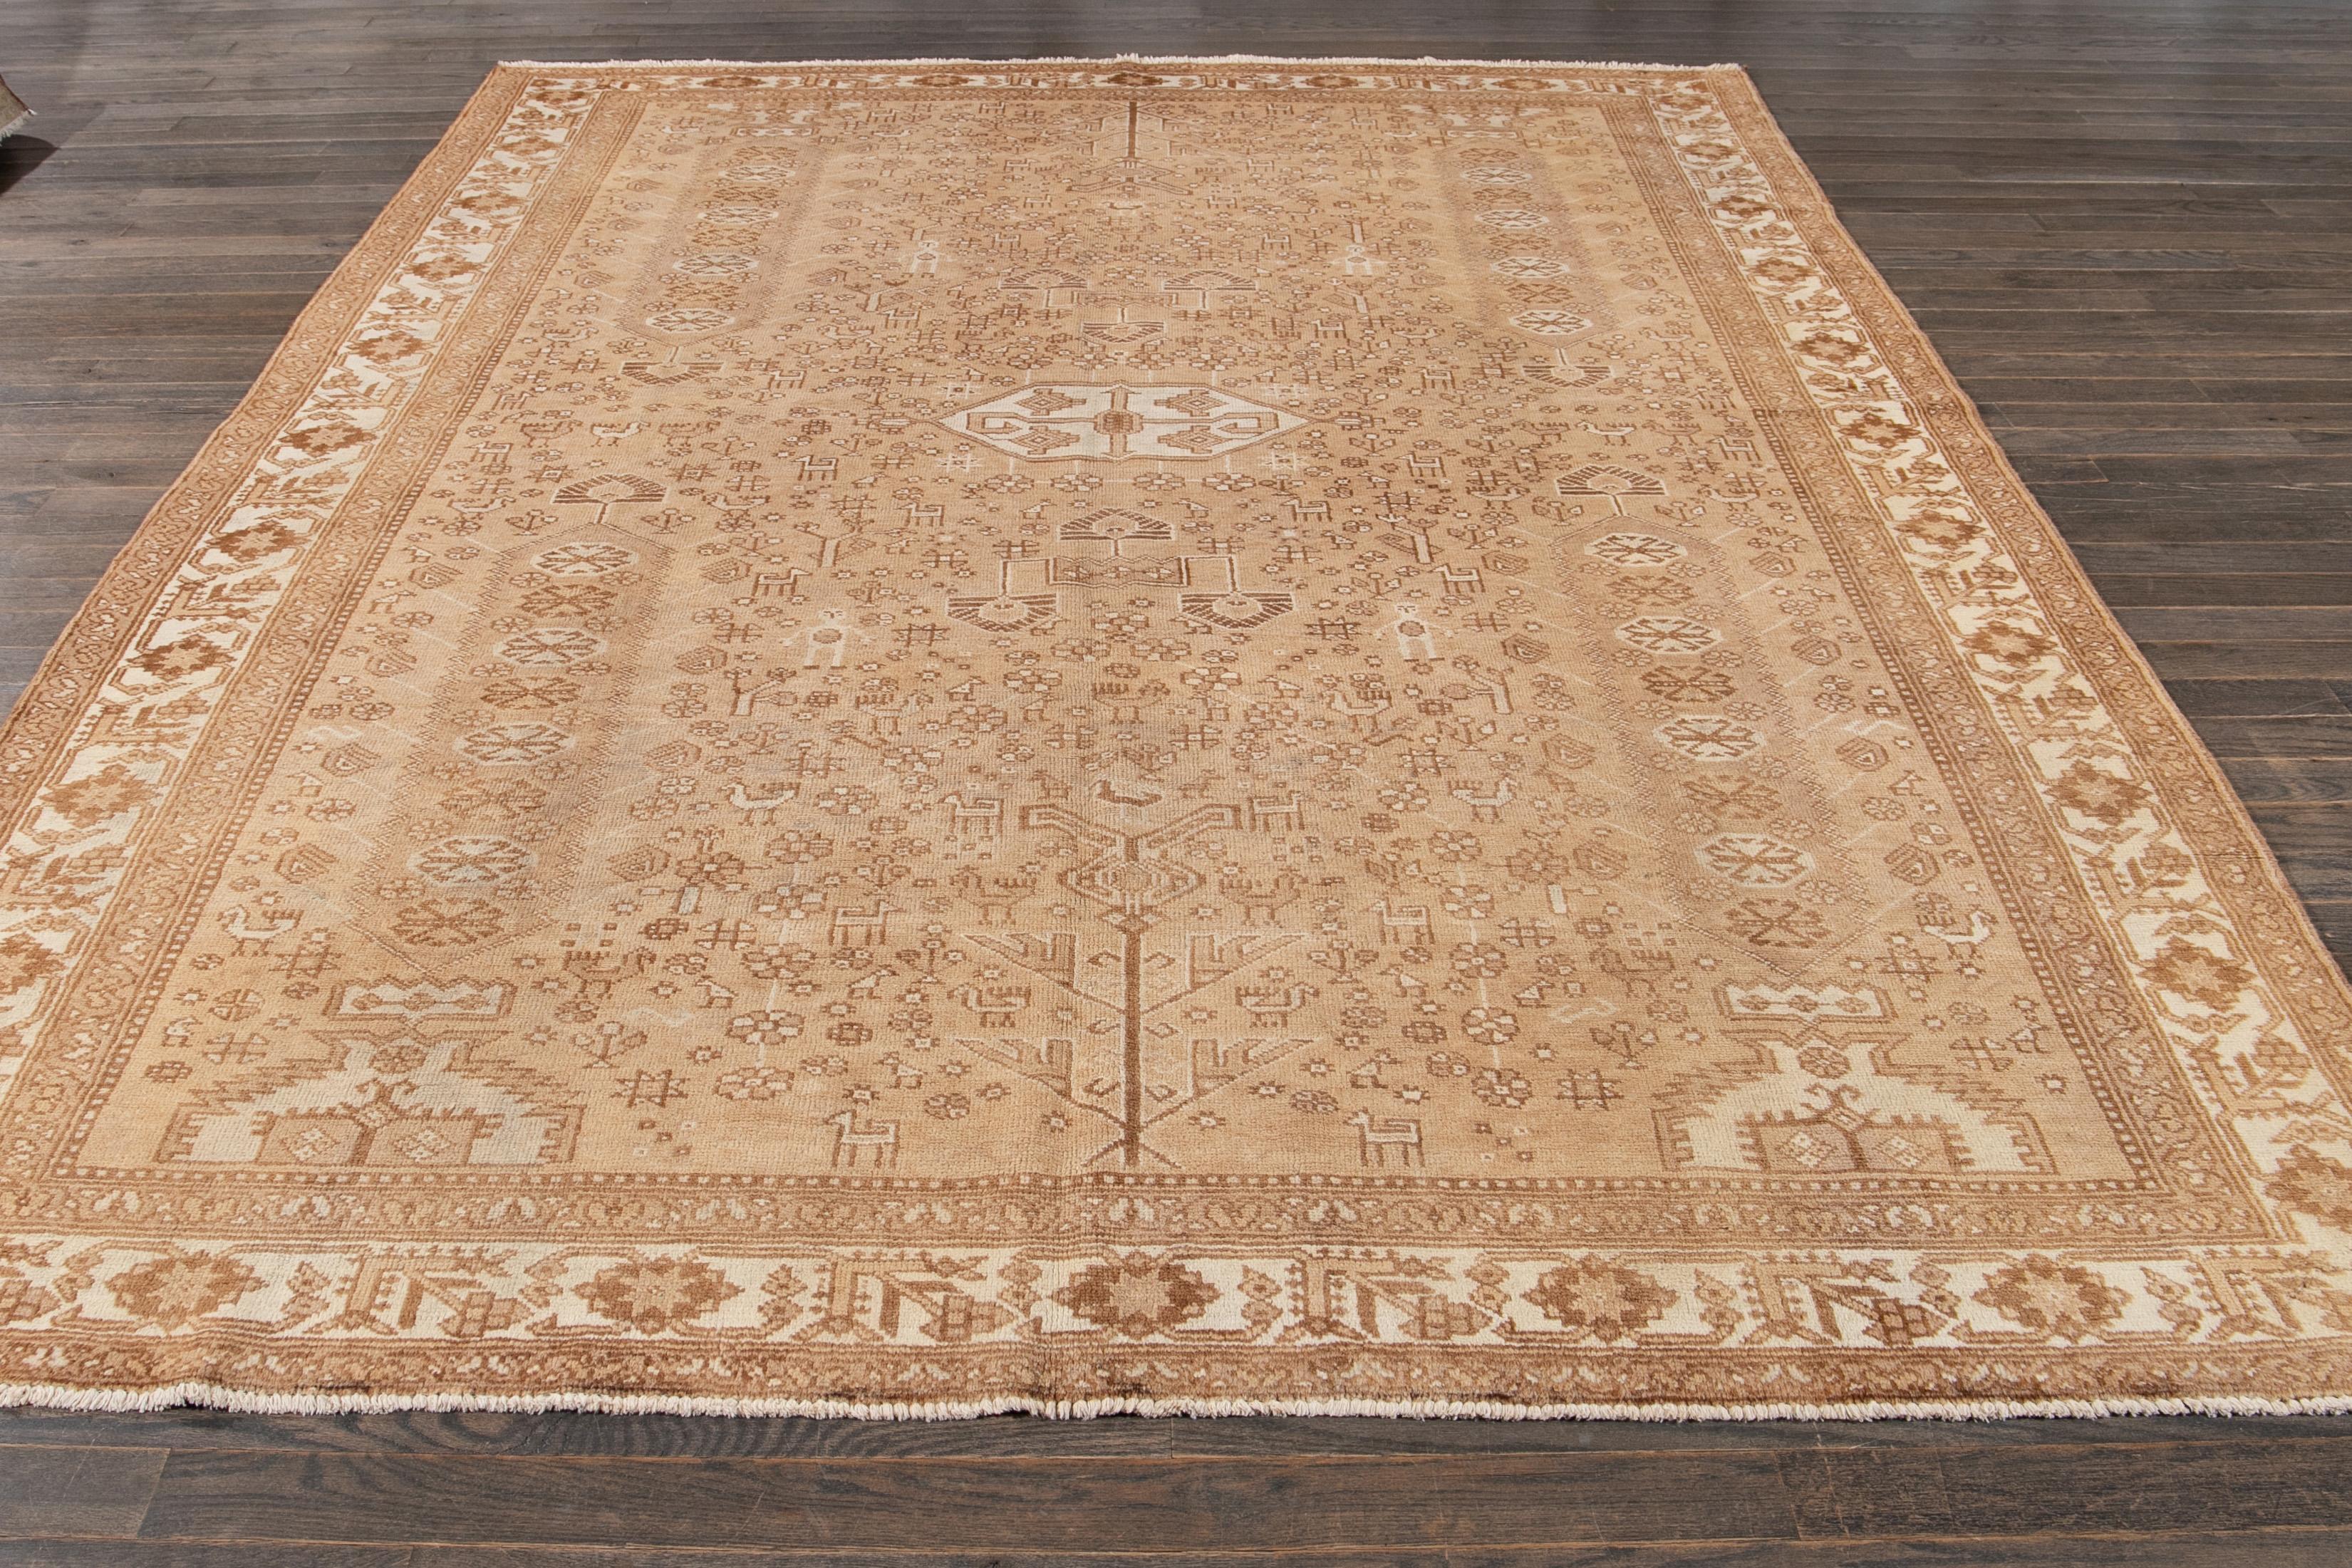 Vintage Persian Hamadan Wool Rug Handmade With Allover Design In Beige Tan Color In Excellent Condition For Sale In Norwalk, CT